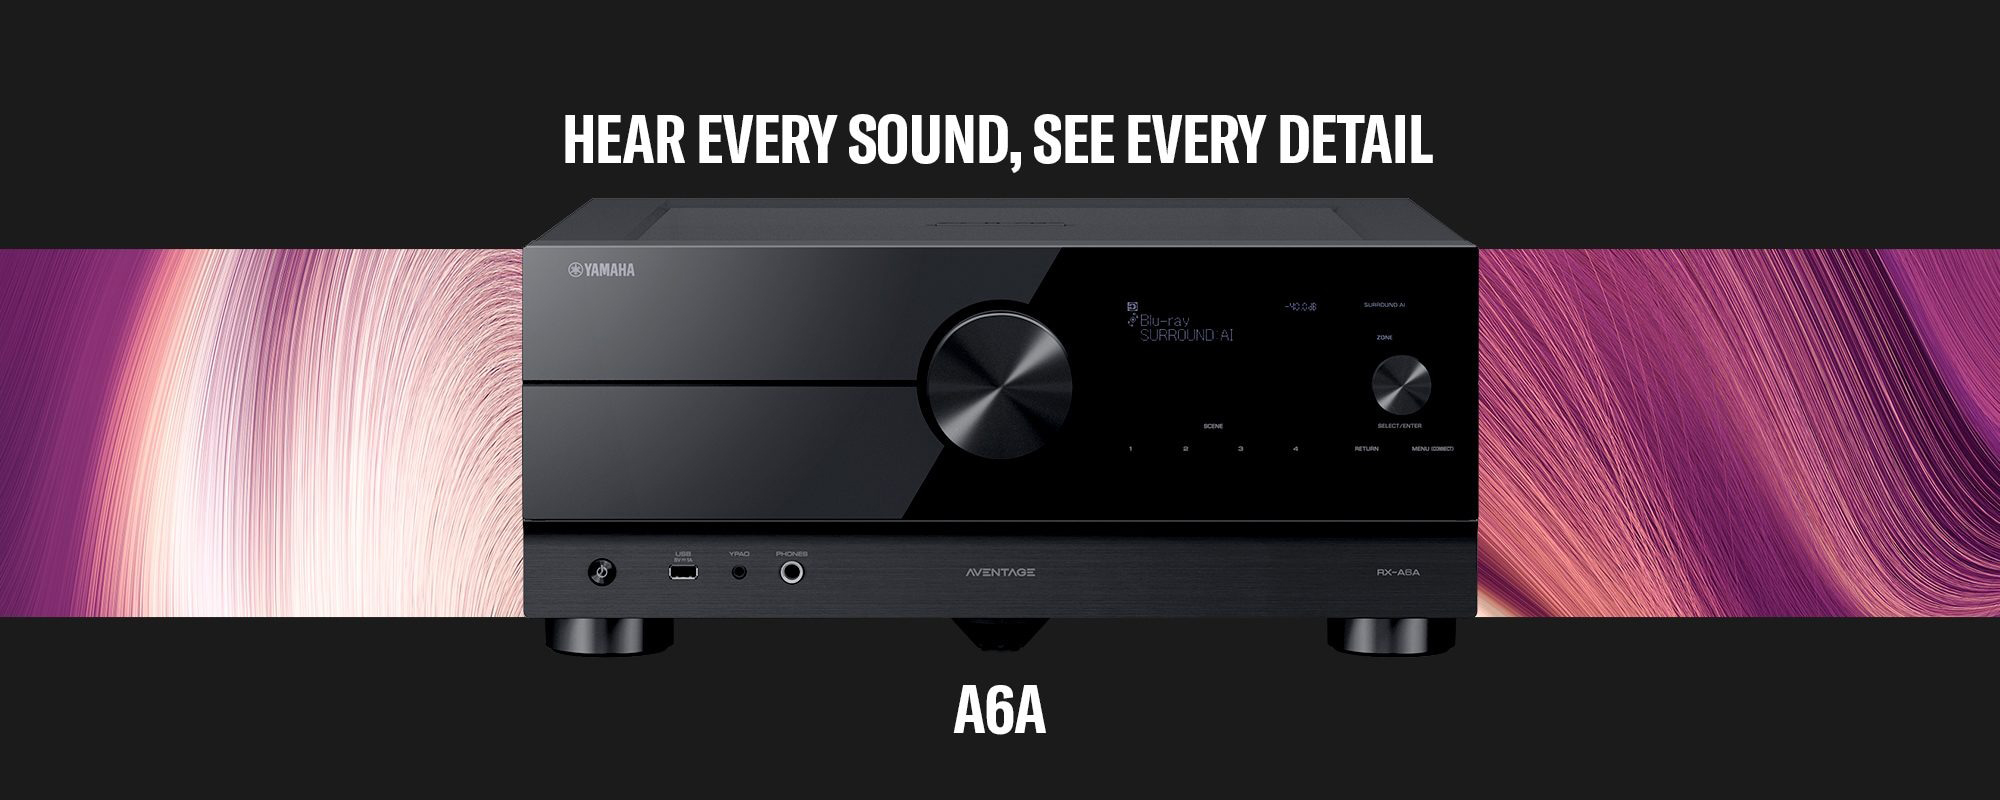 Yamaha RX-A6A A6A AVENTAGE Receiver Amp HEAR EVERY SOUND, SEE EVERY DETAIL